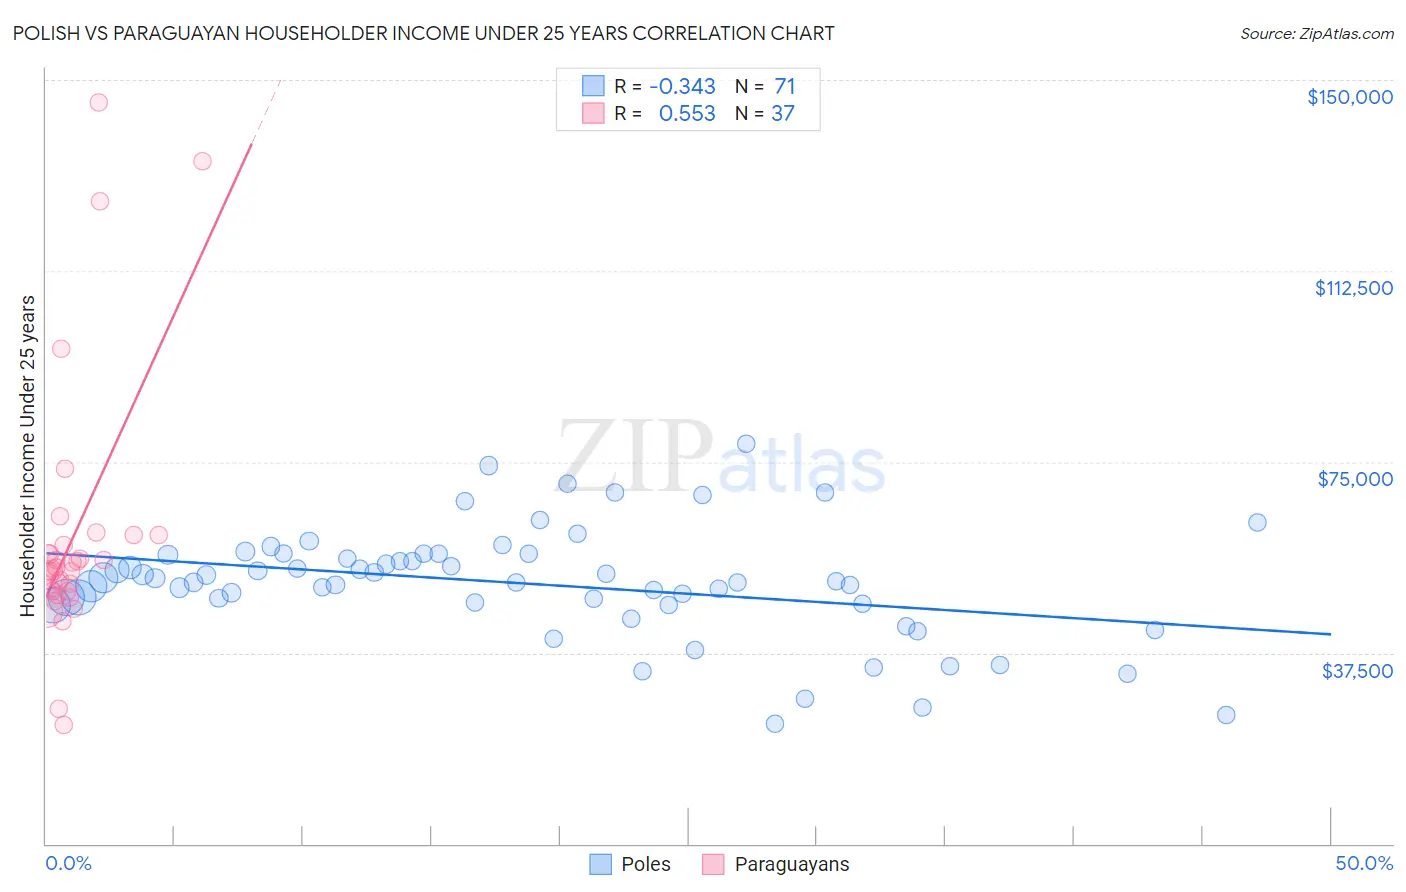 Polish vs Paraguayan Householder Income Under 25 years